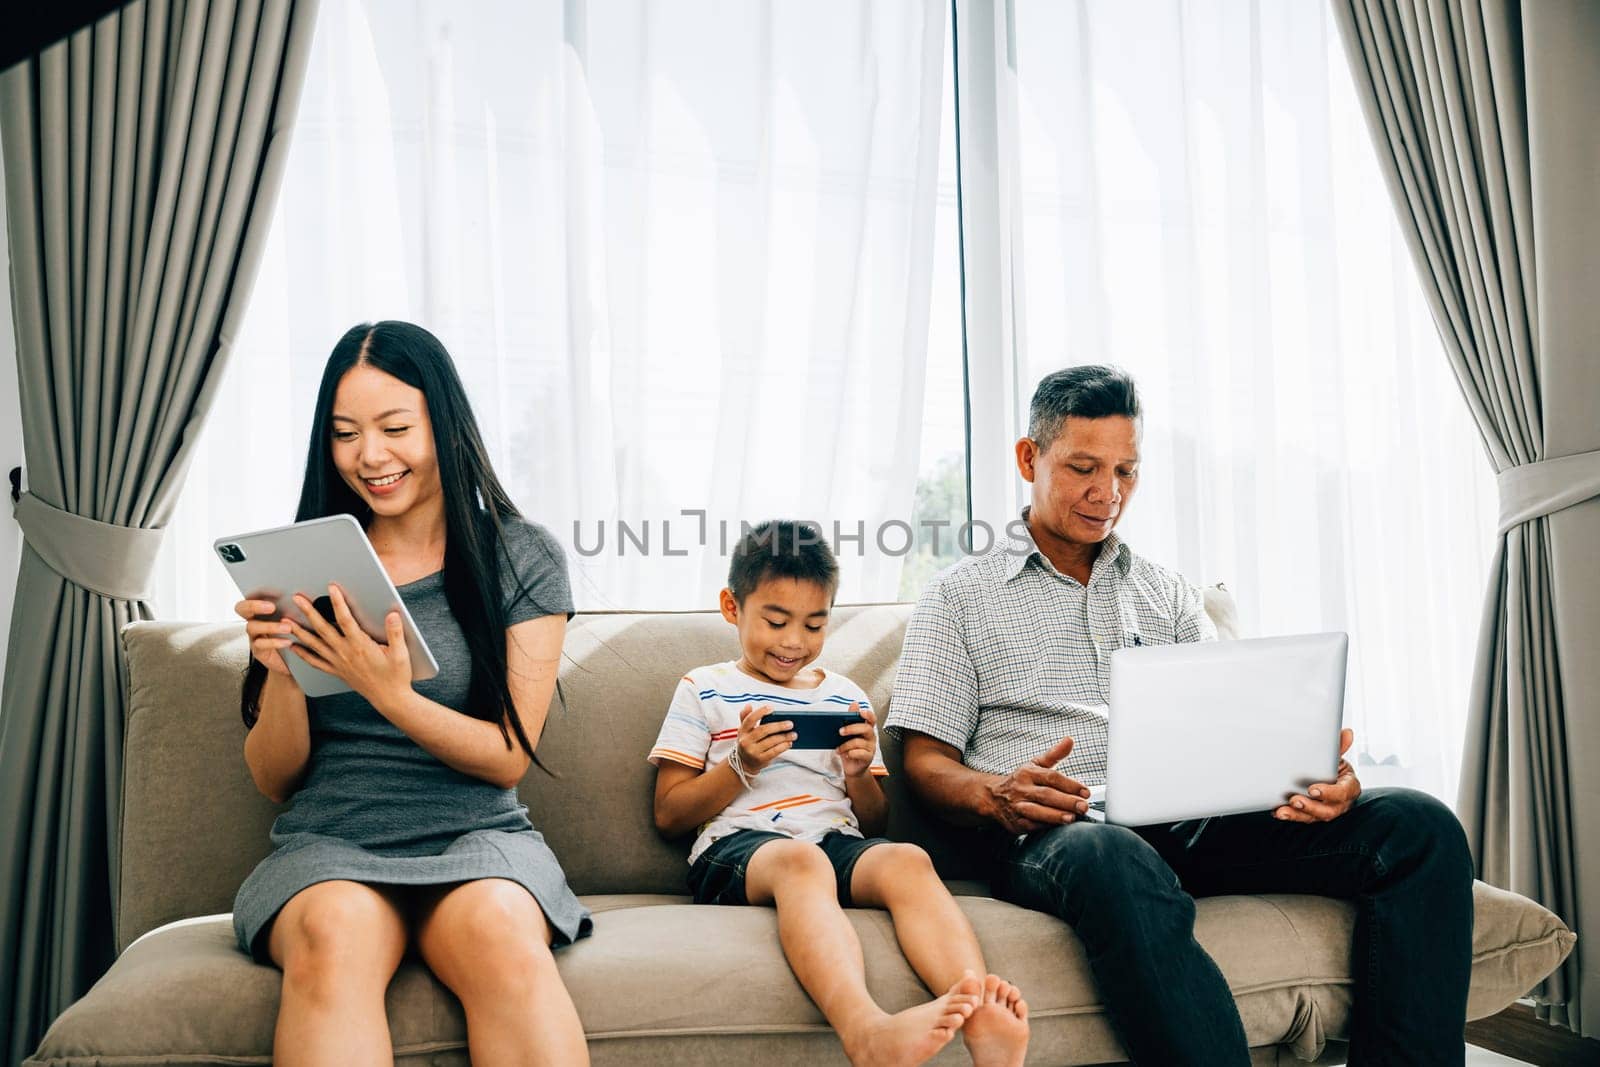 At home an Asian family's device obsession overshadows bonding time. Parents and kids immersed in gadgets illustrate the effects of excessive internet usage. ignores togetherness